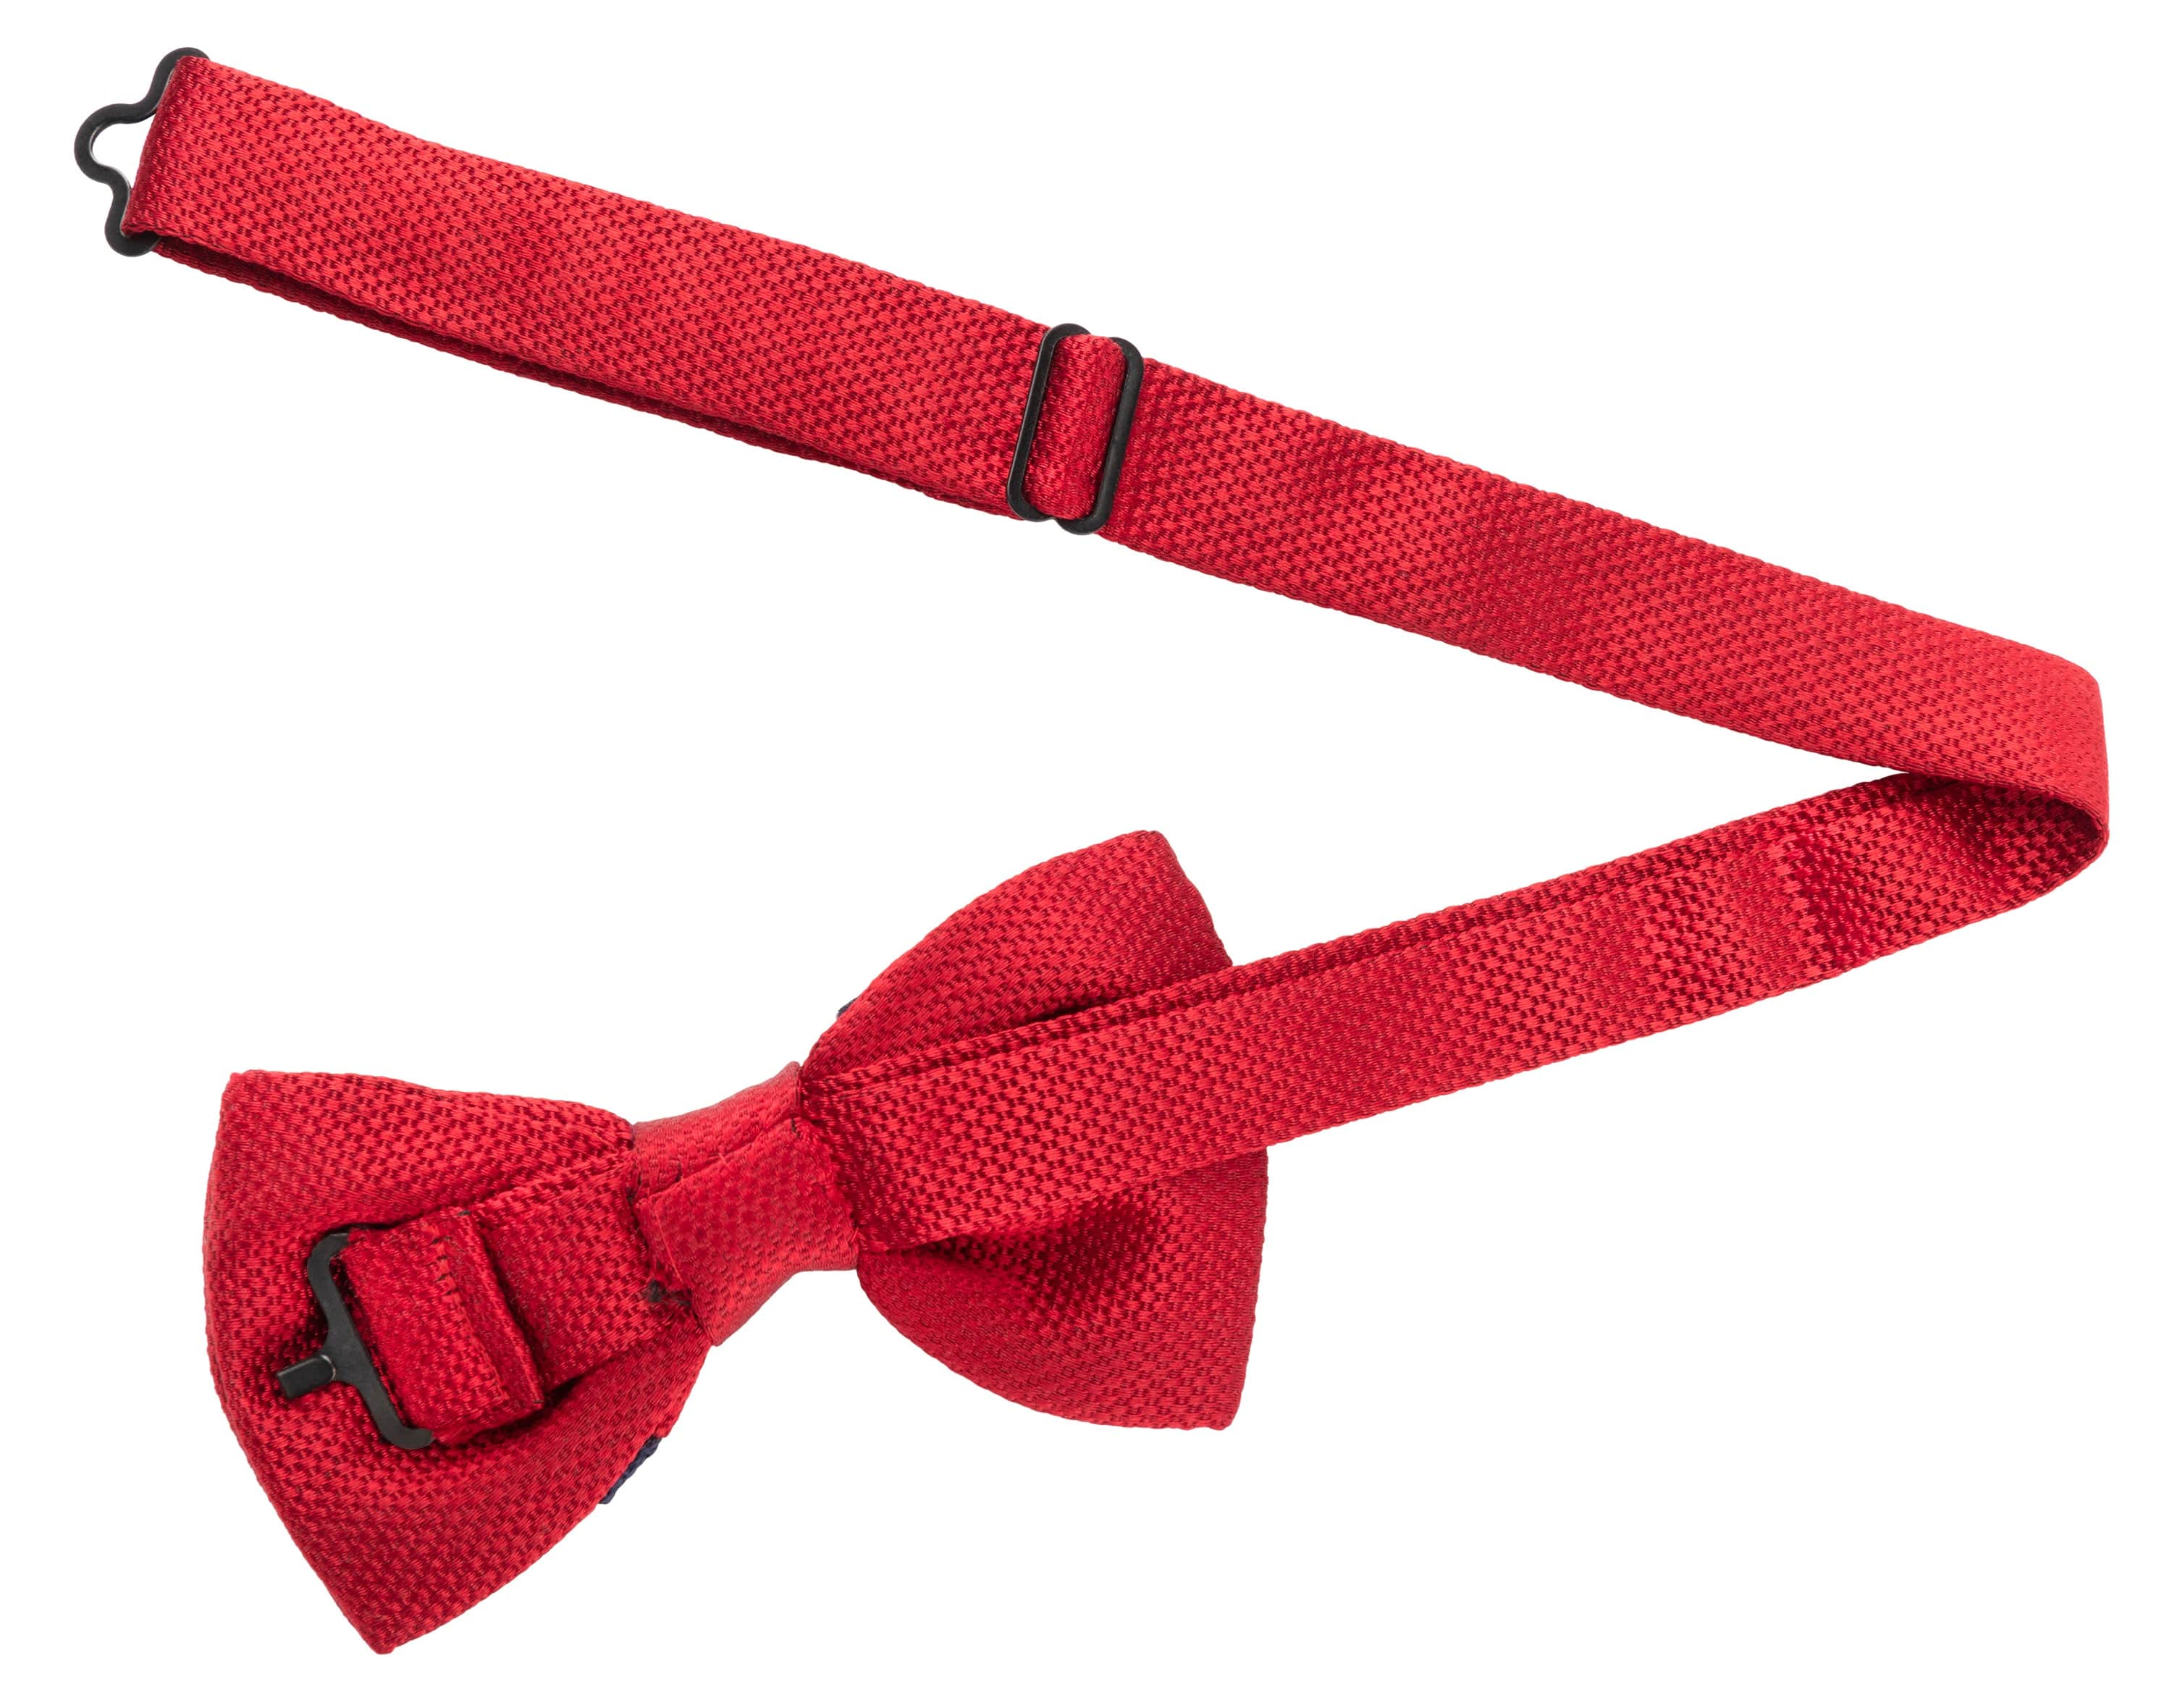 Valor Bow Tie (100% Silk, Red and Navy Blue)